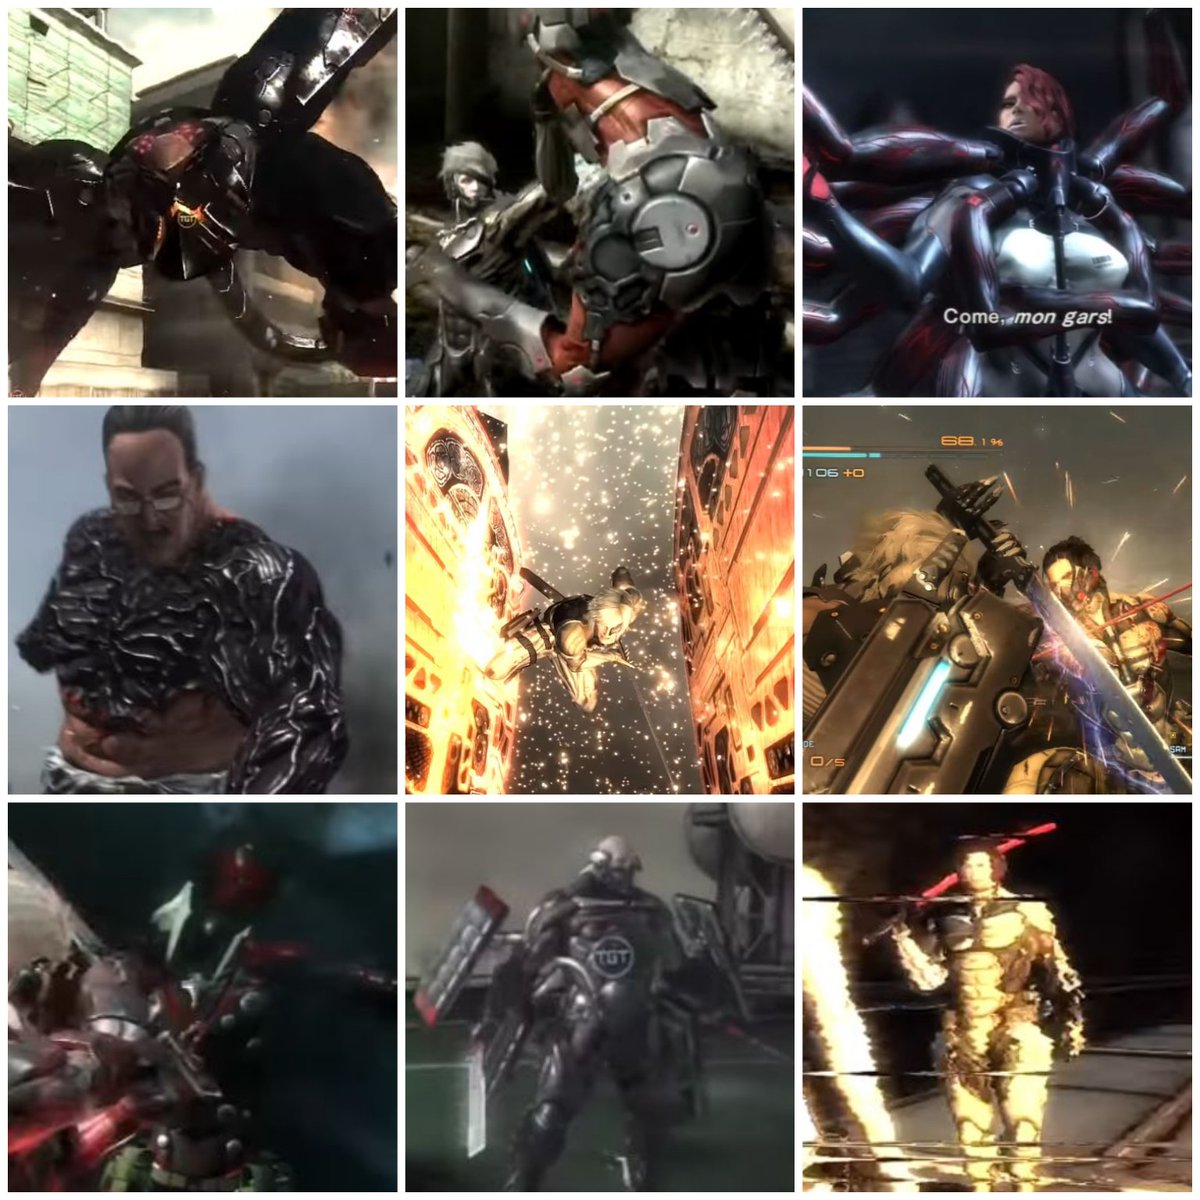 Metal Gear of Context on Twitter: "All boss fights in Metal Gear Rising reviewed and ranked. [A / Twitter